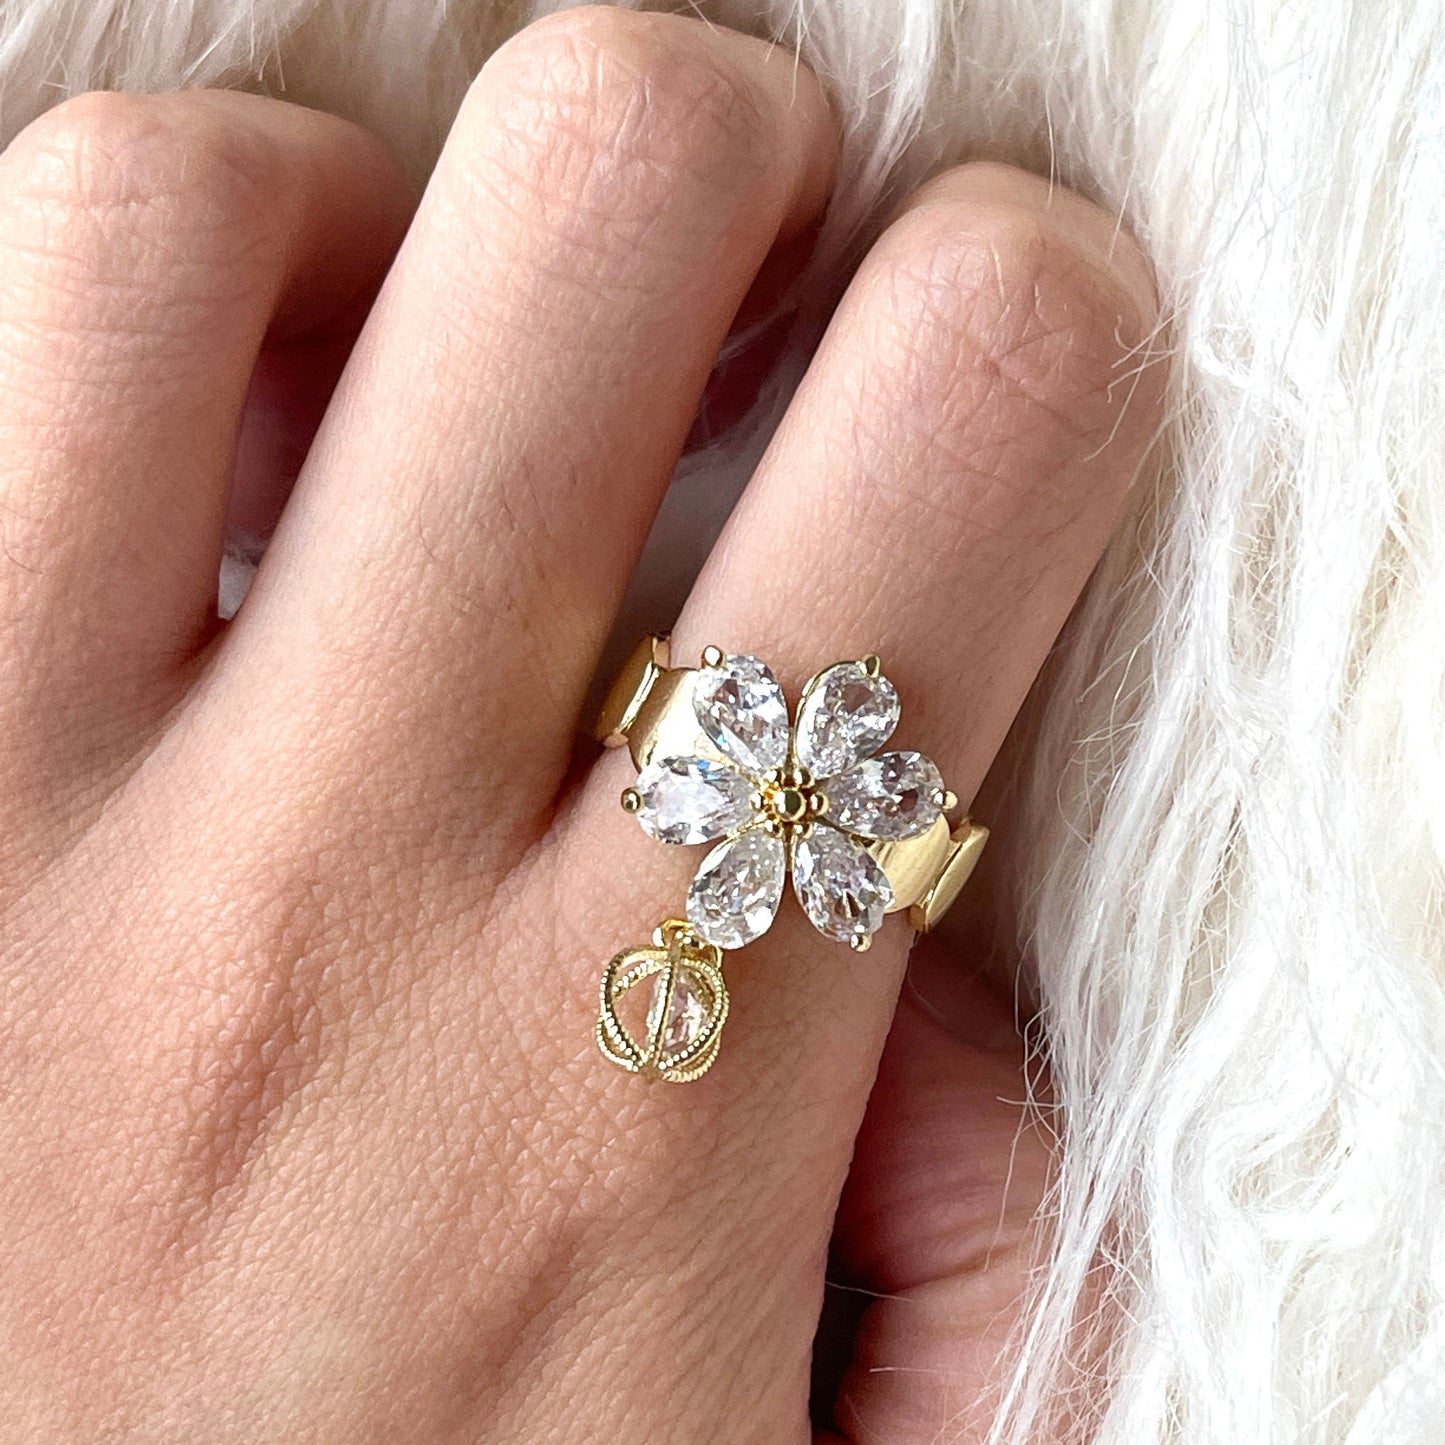 Chunky floral ring, Drop charm ring, Gold wave band, Flower statement diamond ring, Wide cocktail ring, Open rings, Y2k ring birthday gift